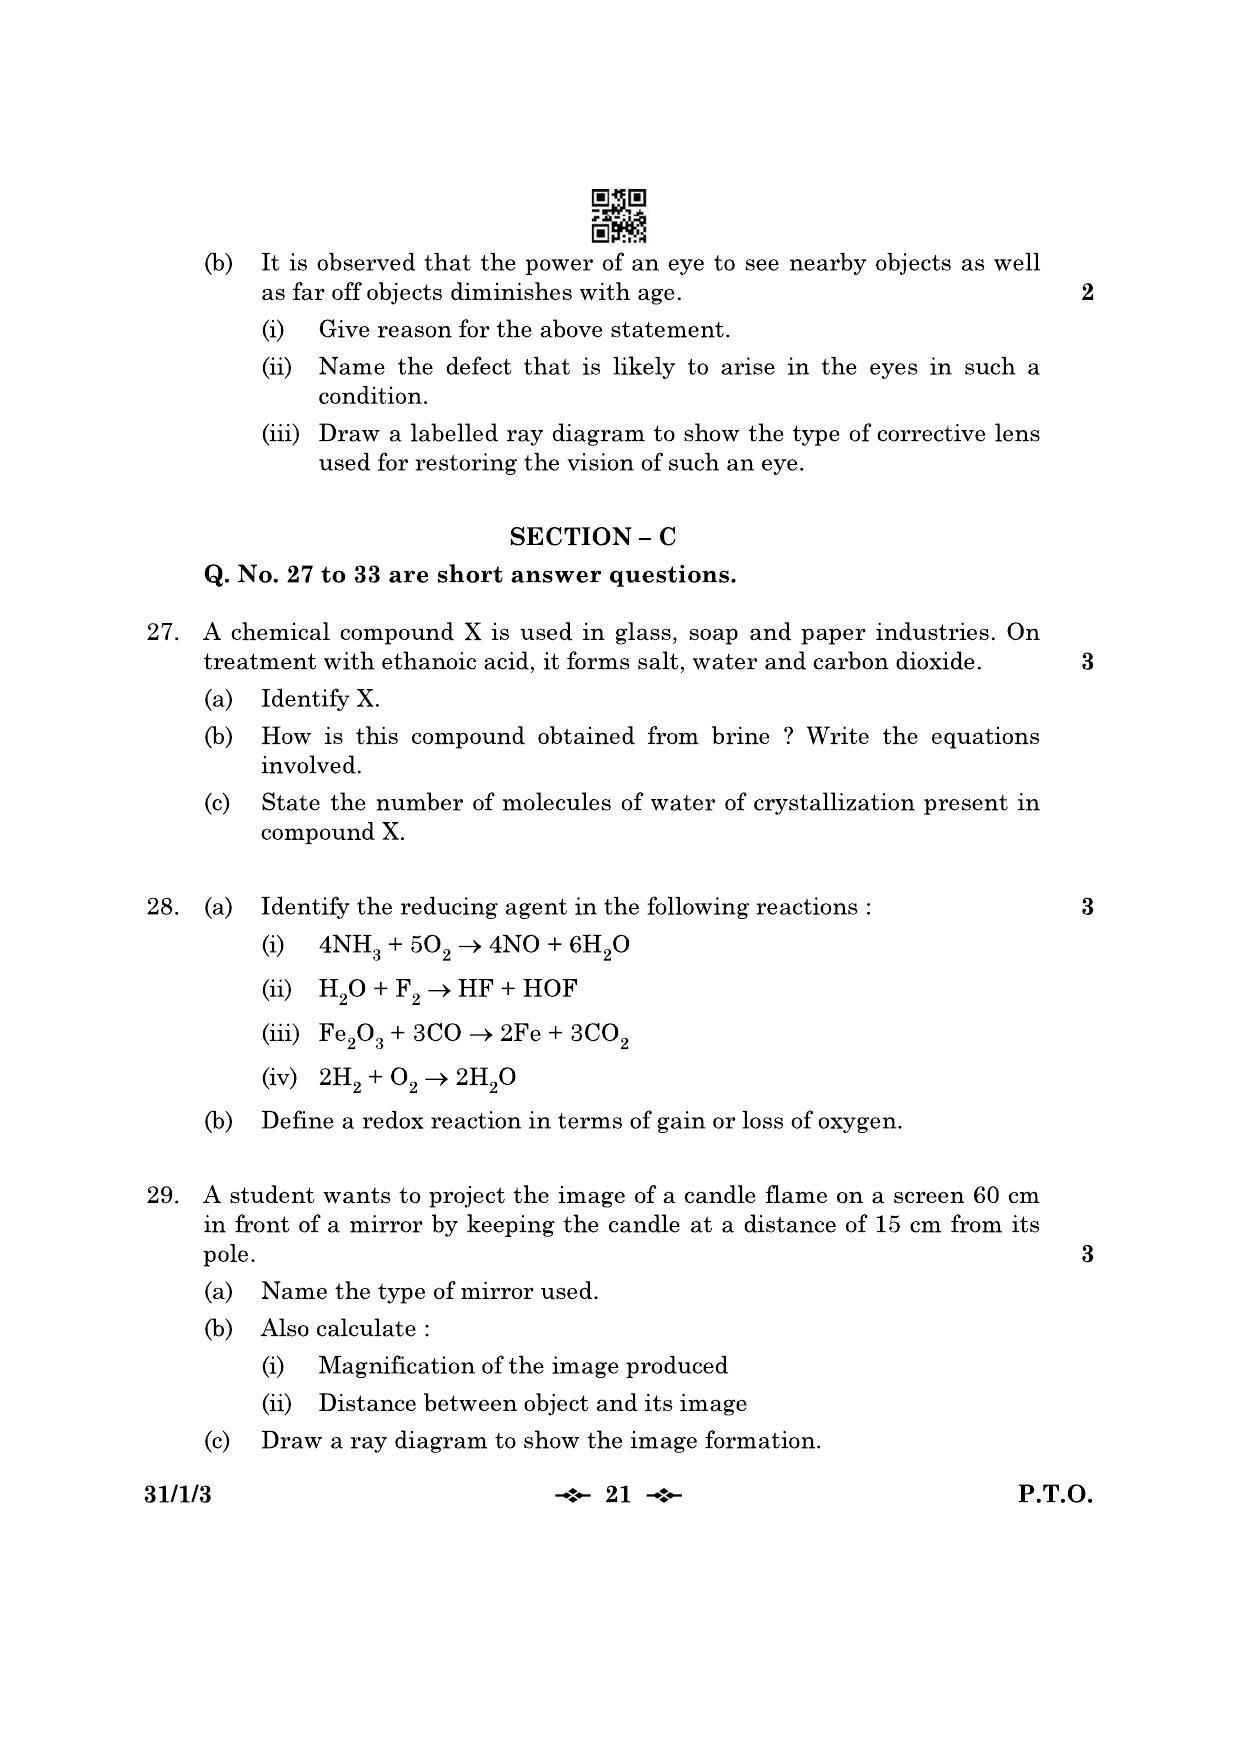 CBSE Class 10 31-1-3 Science 2023 Question Paper - Page 21